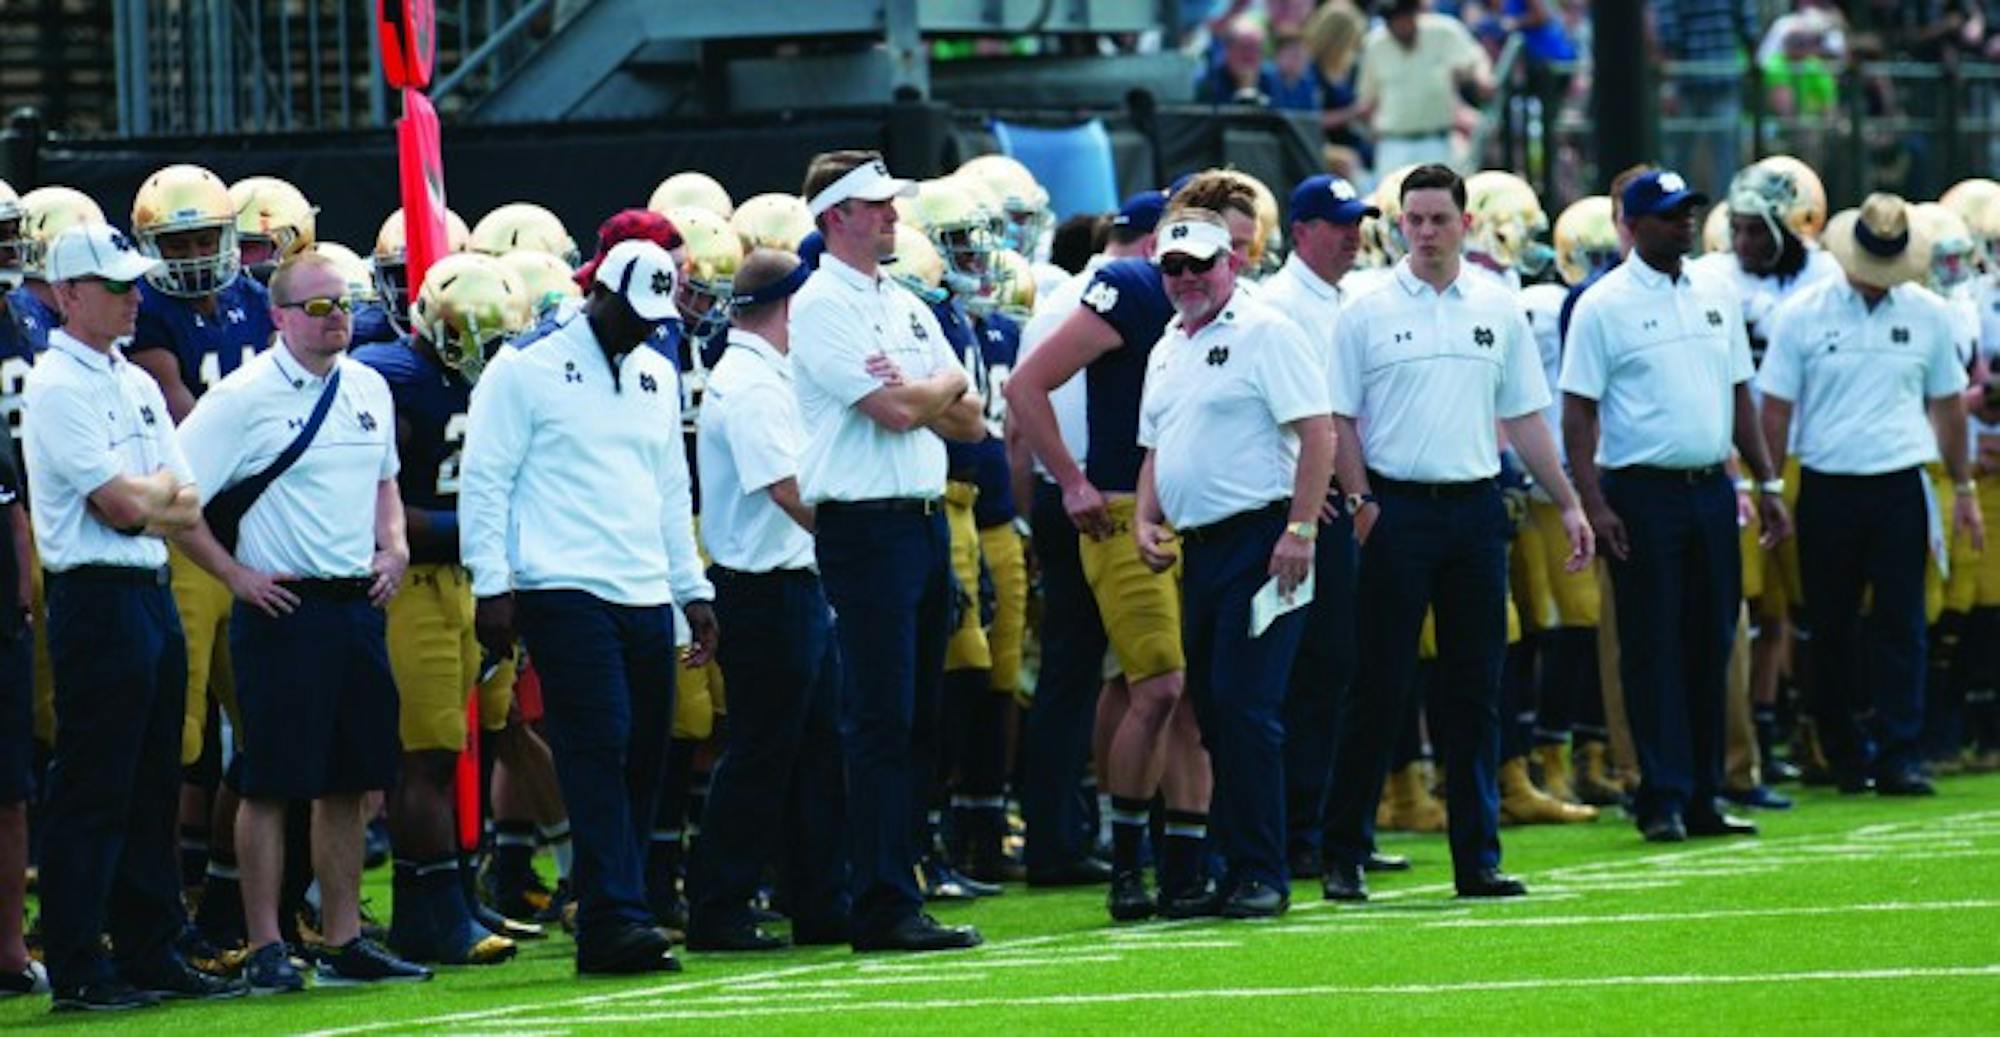 Members of the Irish coaching staff stand on the sidelines during the Blue-Gold Game on April 18. Notre Dame’s new position coaches have found success in their first year despite injuries to starters.